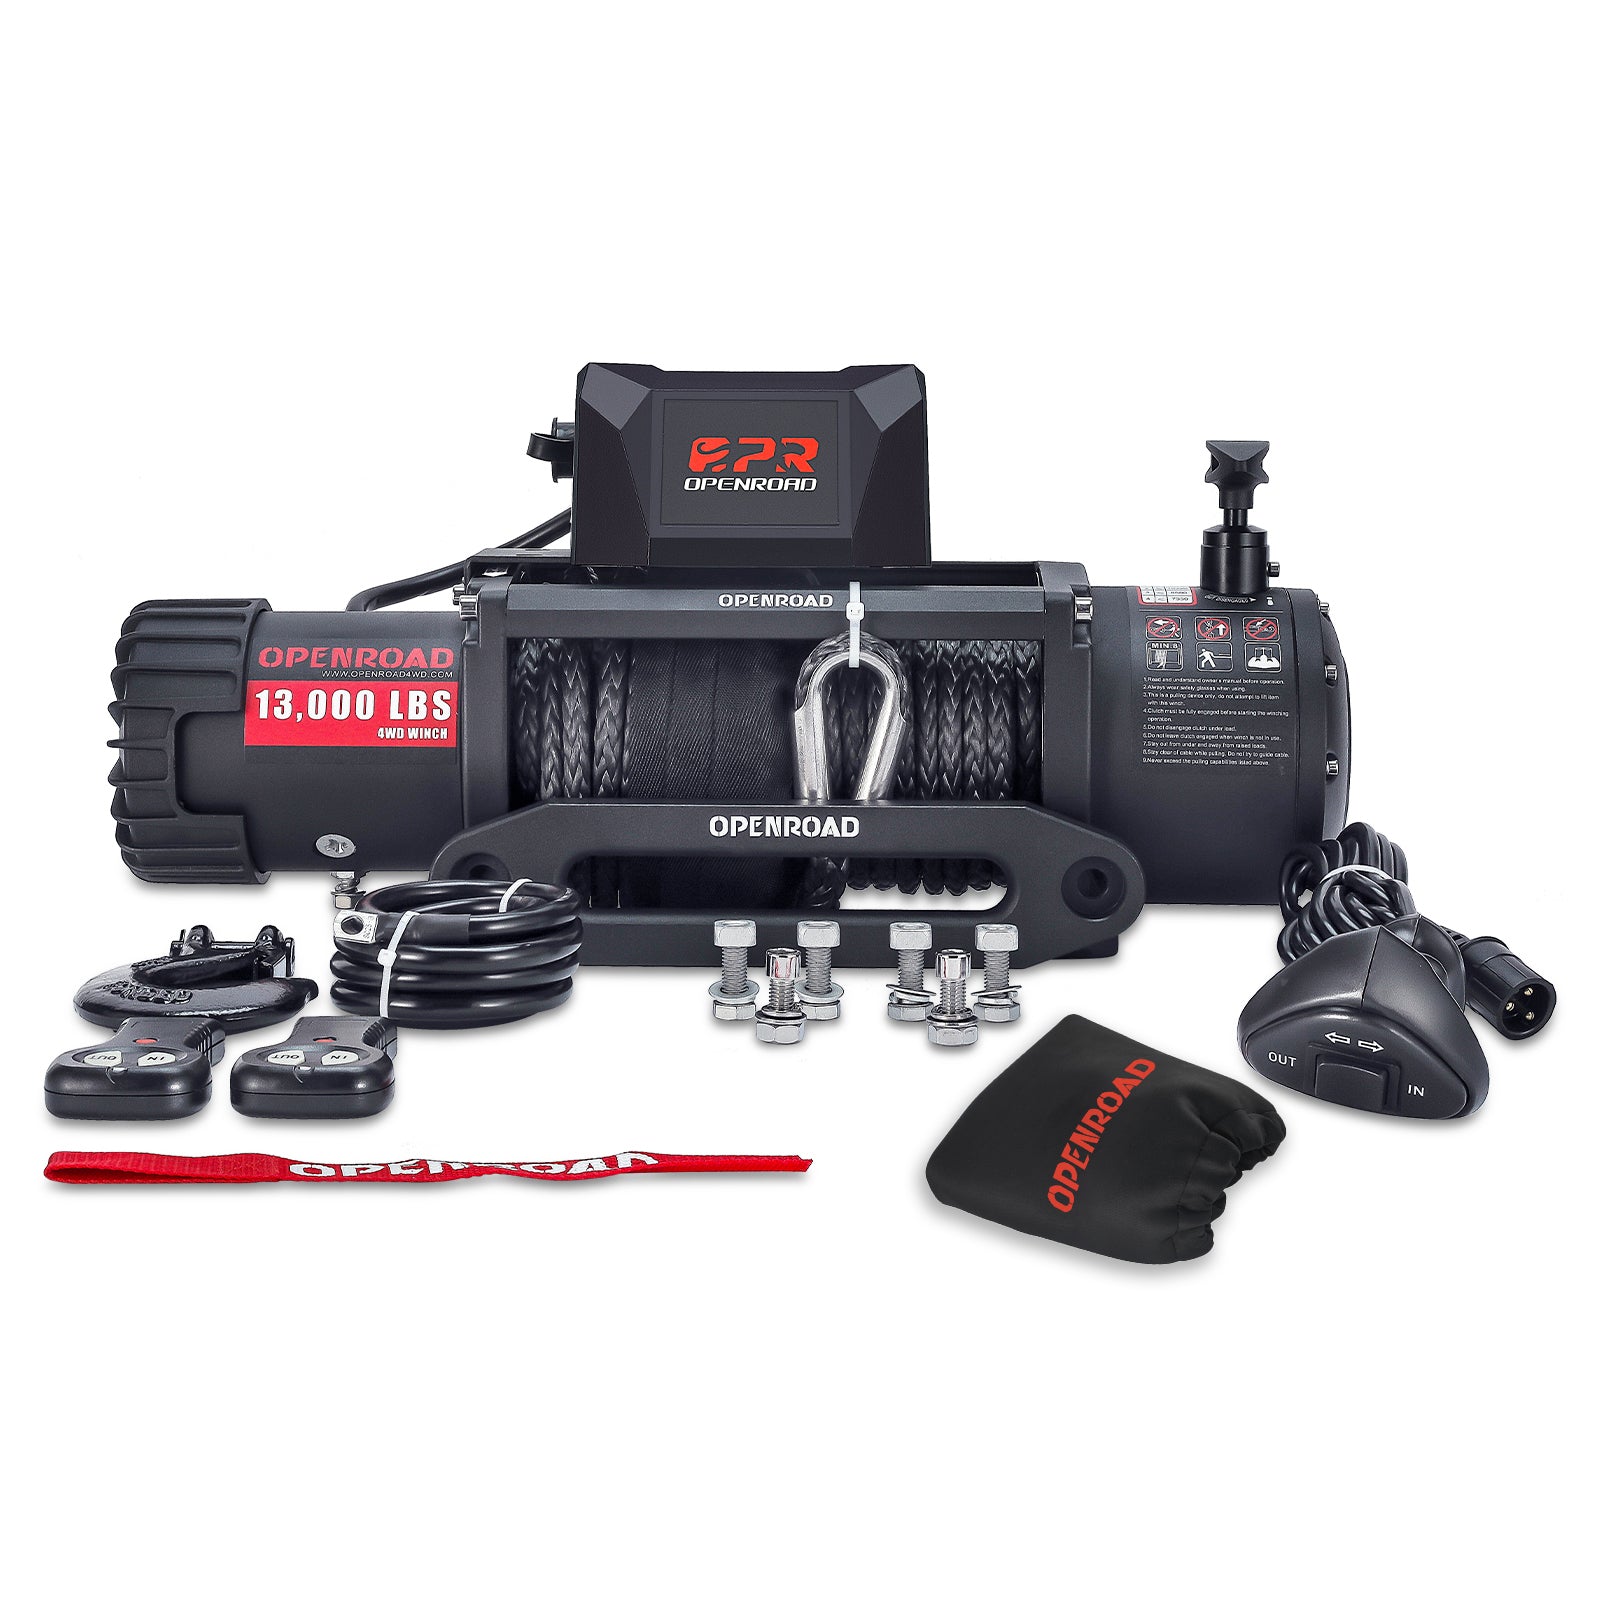 OPENROAD 13,000 lbs winch with synthetic rope and 2 wireless remote controllers - Panther Series 2S, compatible with the front bumper designed for a 12,000 lbs winch winch OPENROAD   